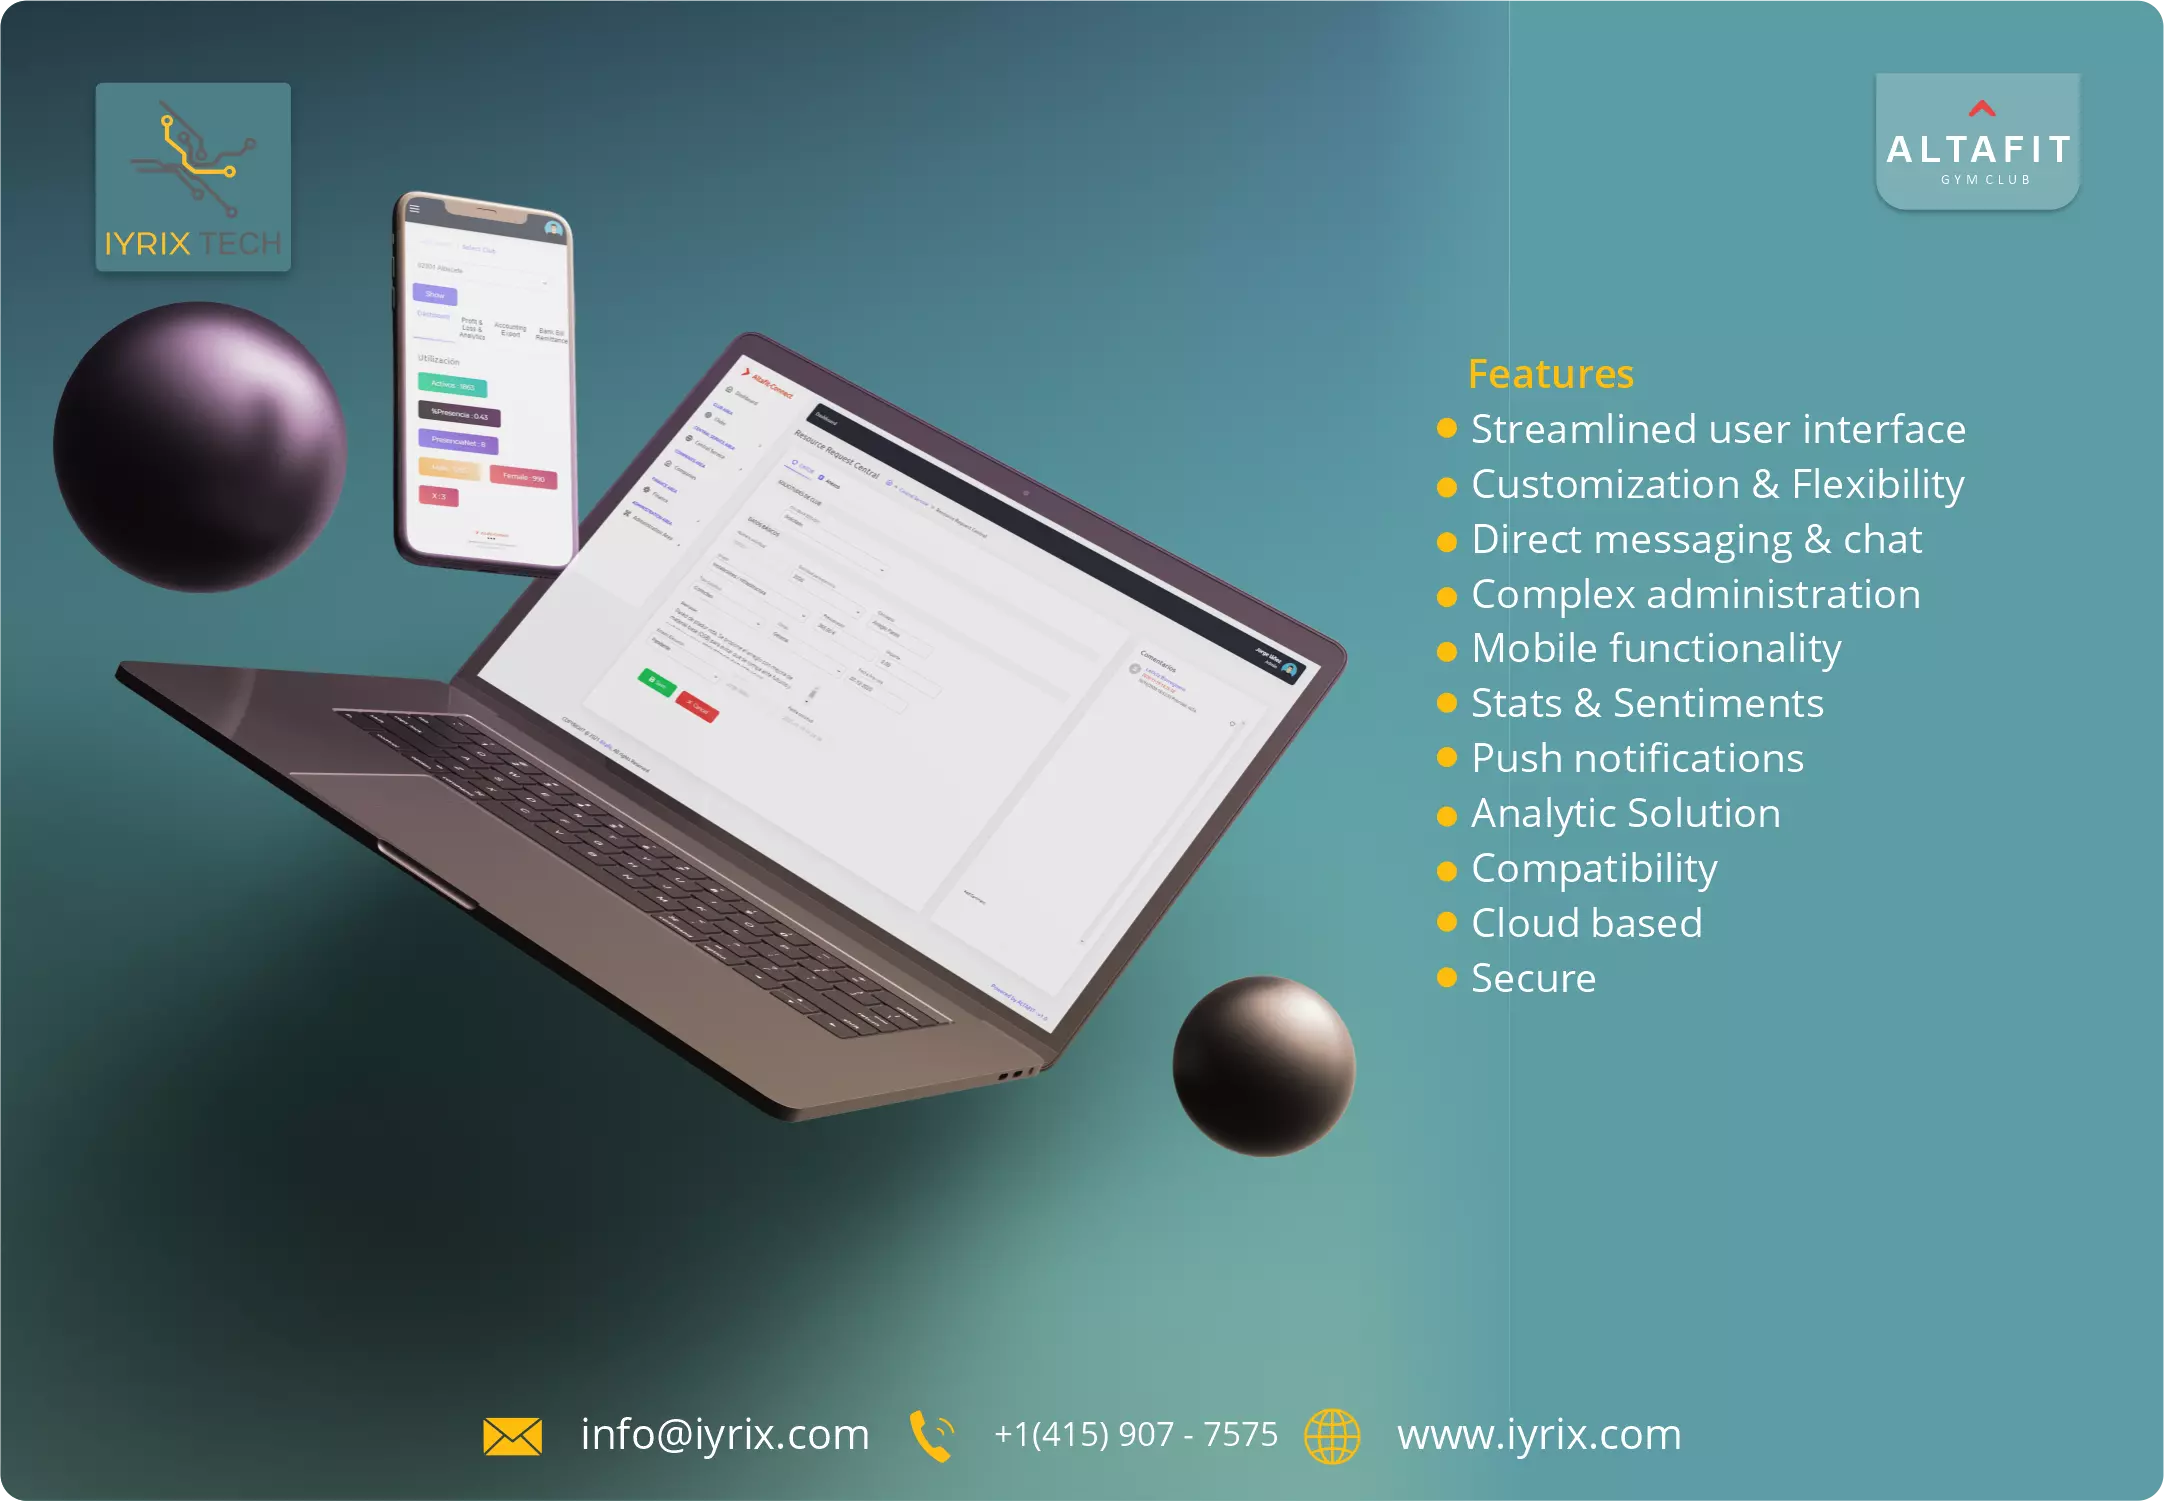 Web
                                                                Streamlined user interface
                                                                Customization & Flexibility
                                                                Direct messaging & chat
                                                                Complex administration
                                                                Mobile functionality
                                                                Stats & Sentiments
                                                                Push notifications
                                                                Analytic Solution
                                                                Compatibility 
                                                                Cloud based
                                                                Secure
                                                                